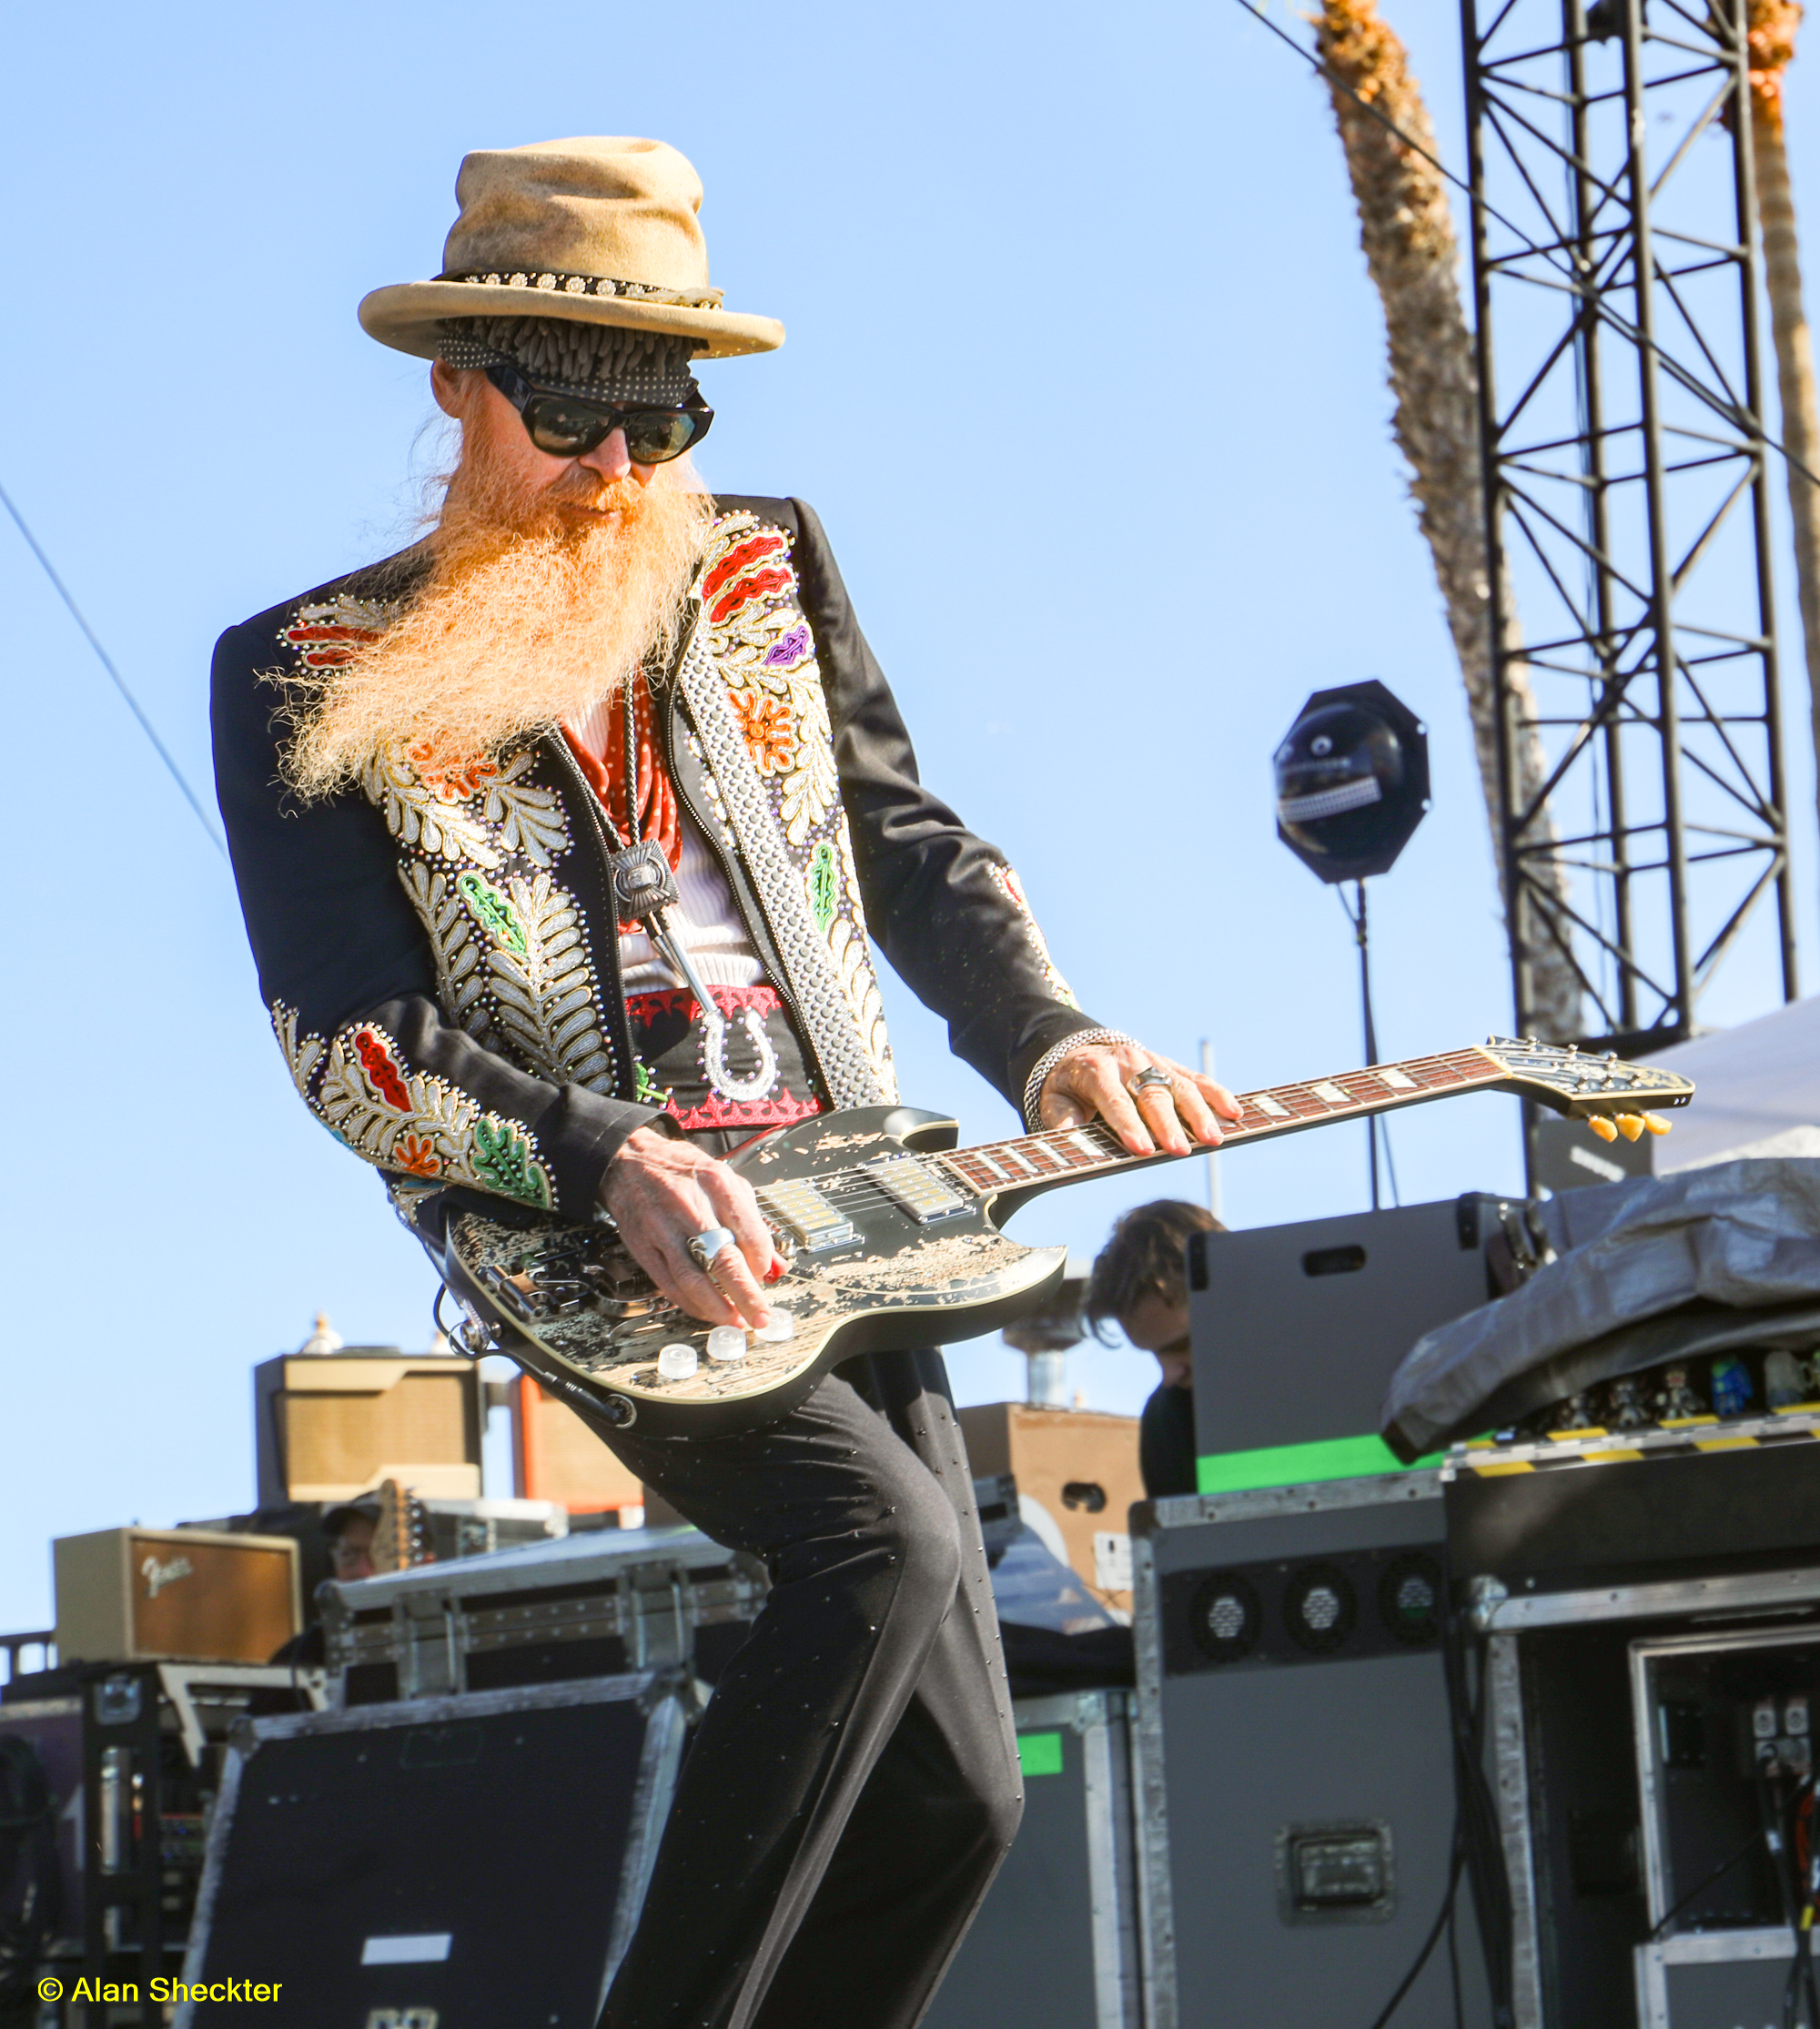 ZZ Top’s lead guitarist Billy Gibbons